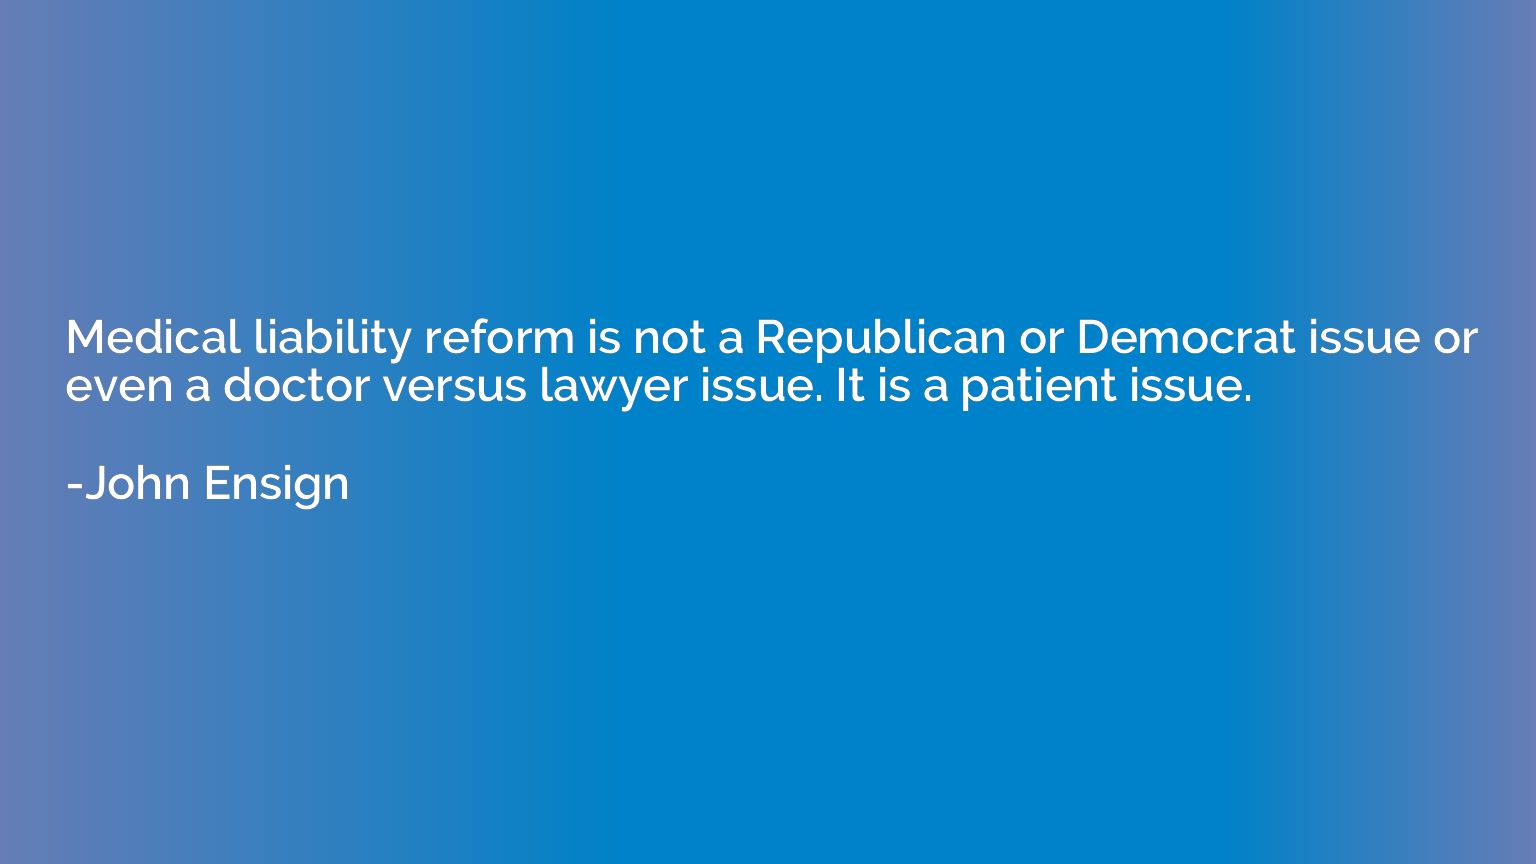 Medical liability reform is not a Republican or Democrat iss